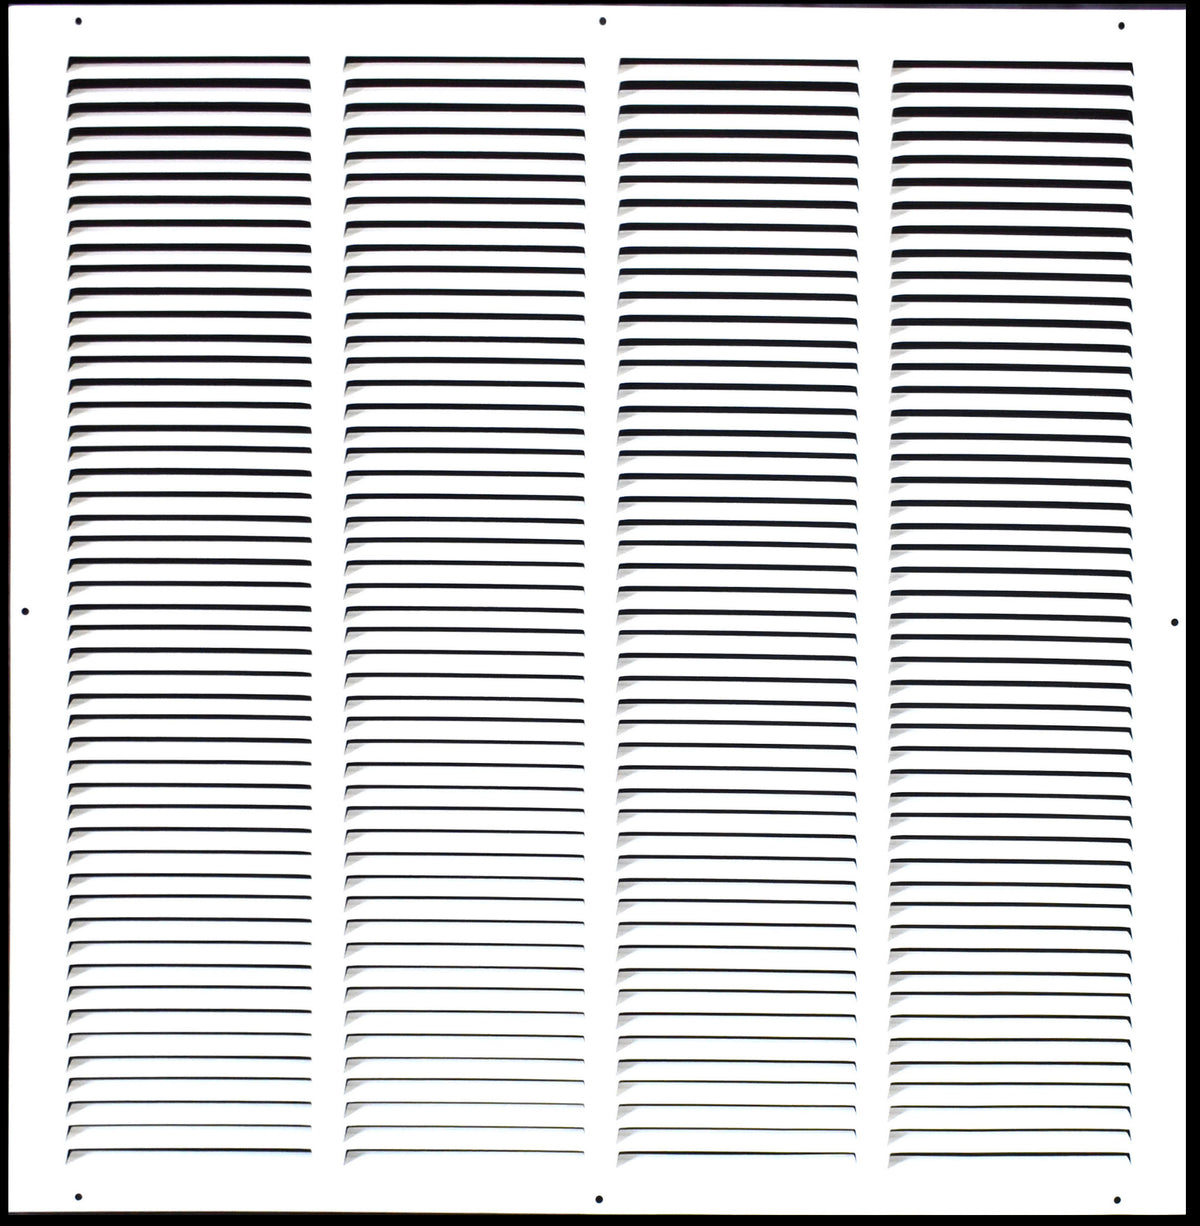 airgrilles 24" x 24" duct opening   hd steel return air grille for sidewall and ceiling  agc  7agc-flt-wh-24x24 756014649659 - 1